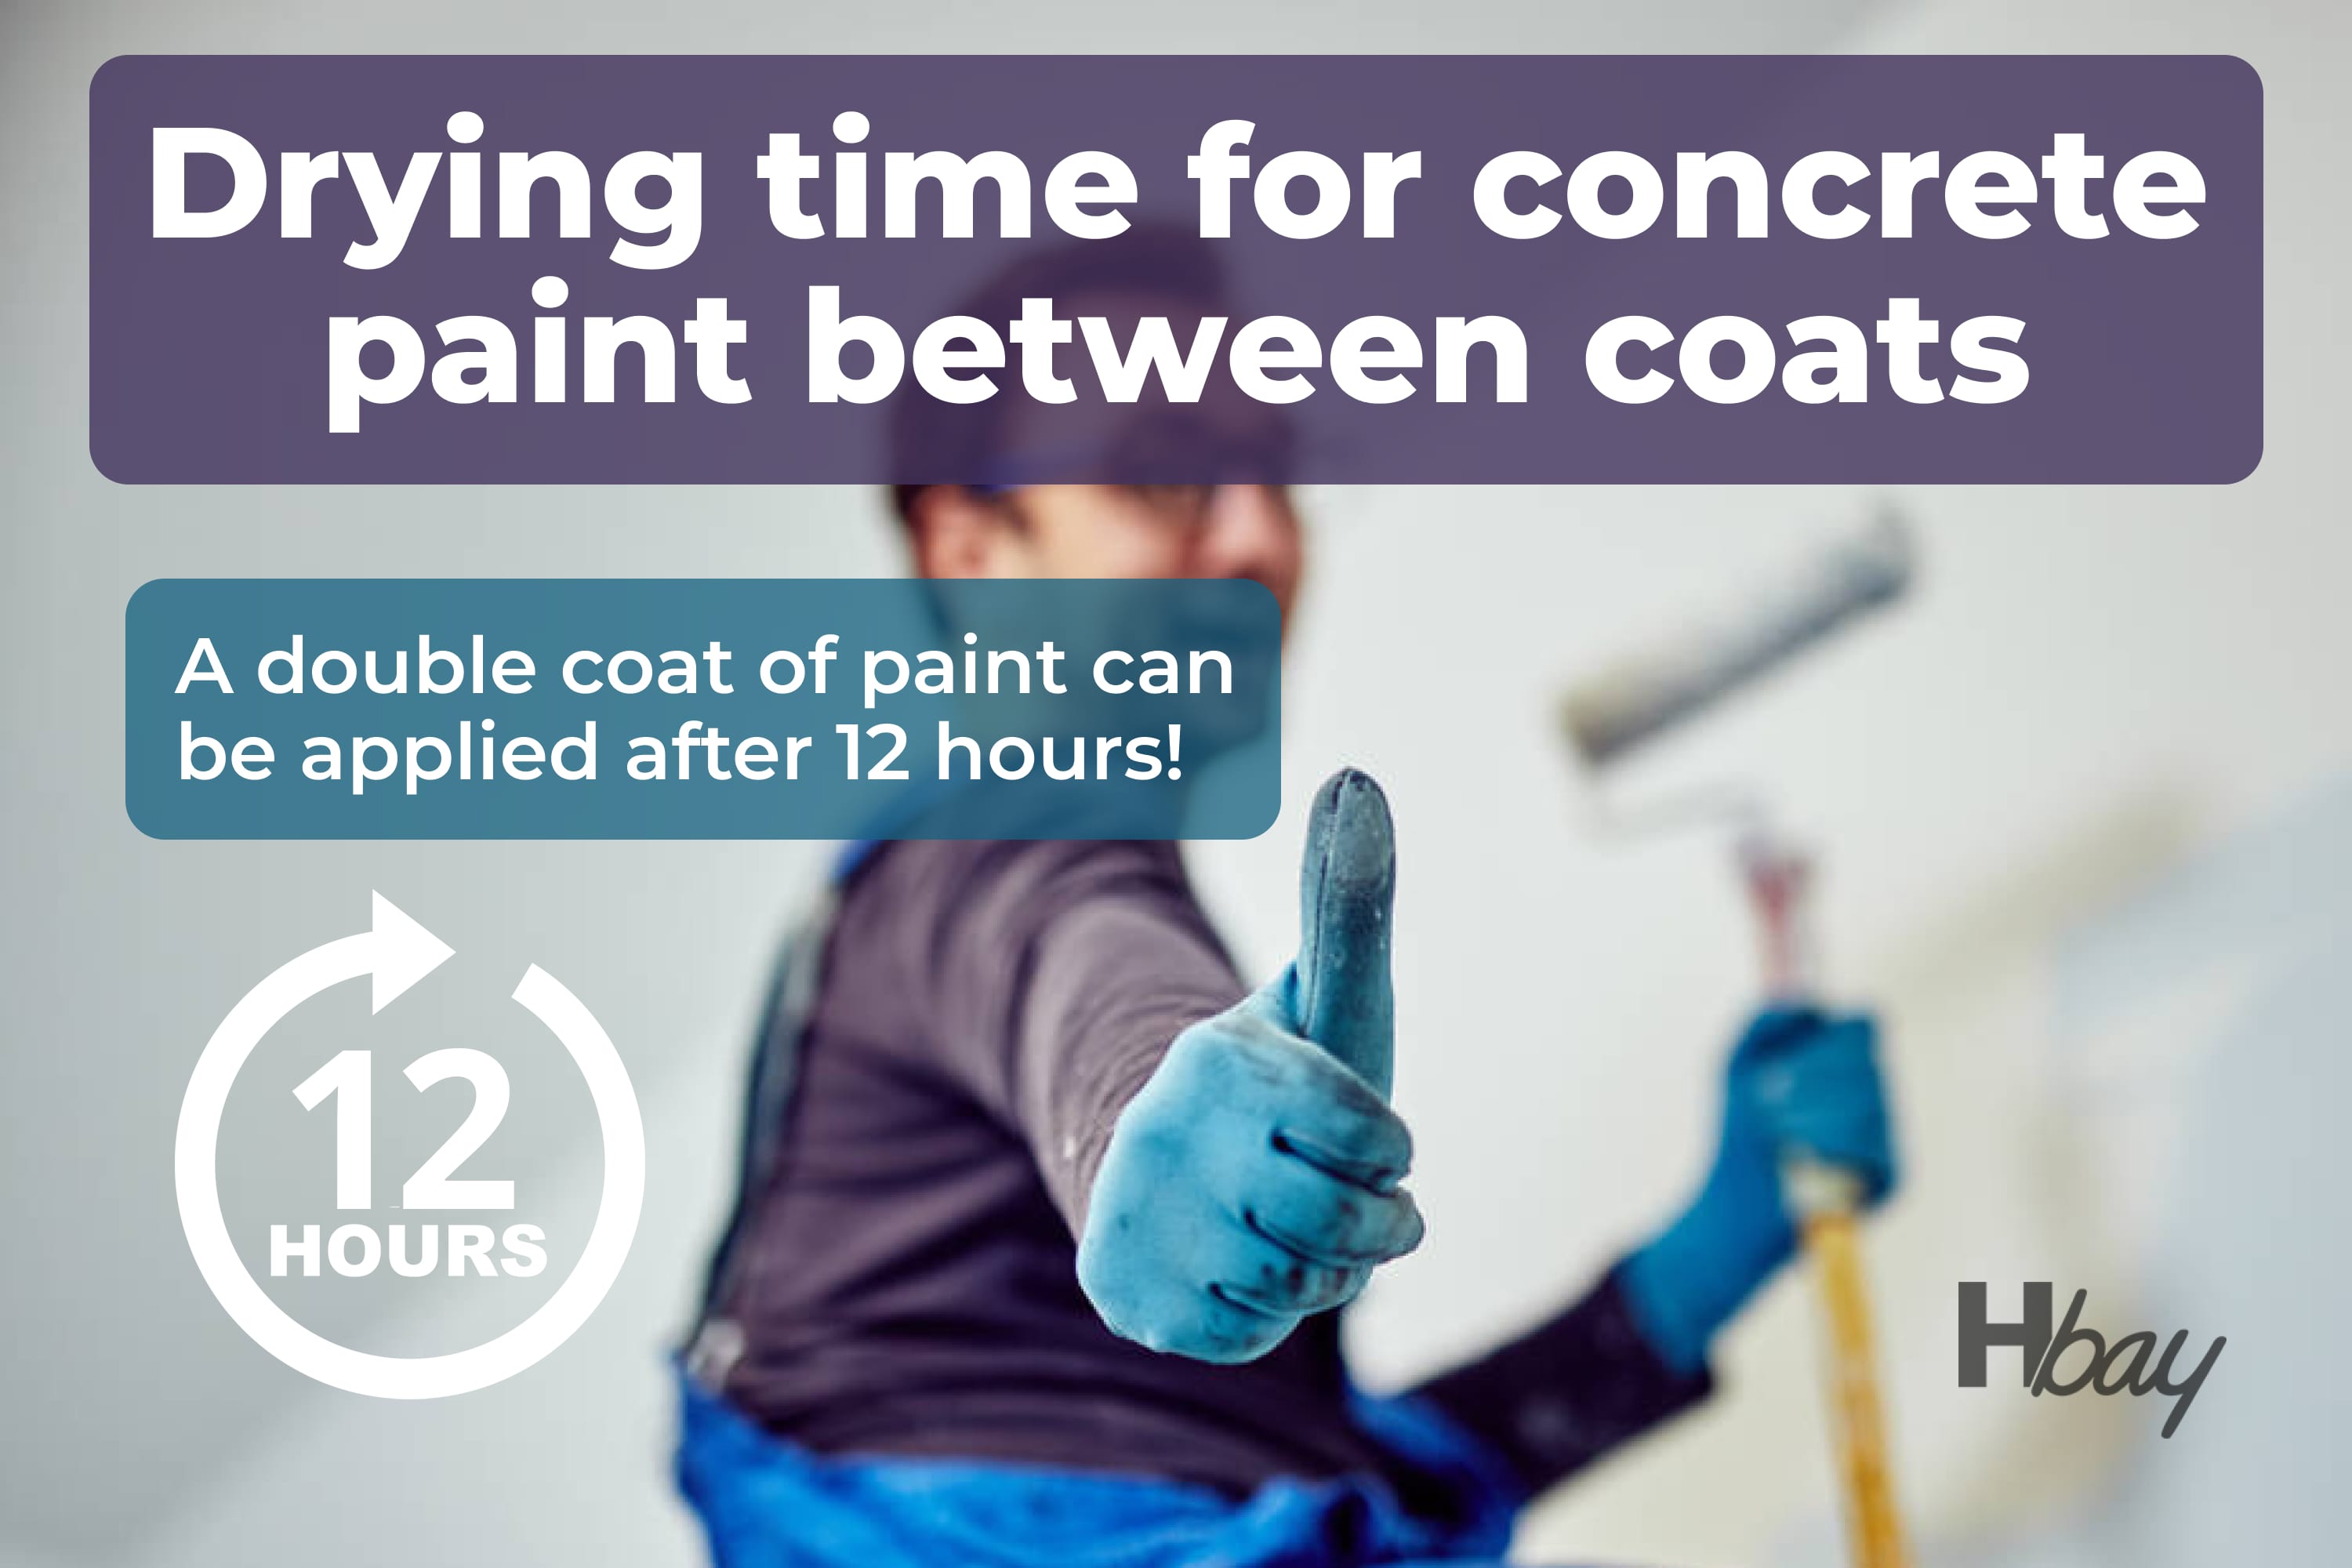 Drying time for concrete paint between coats